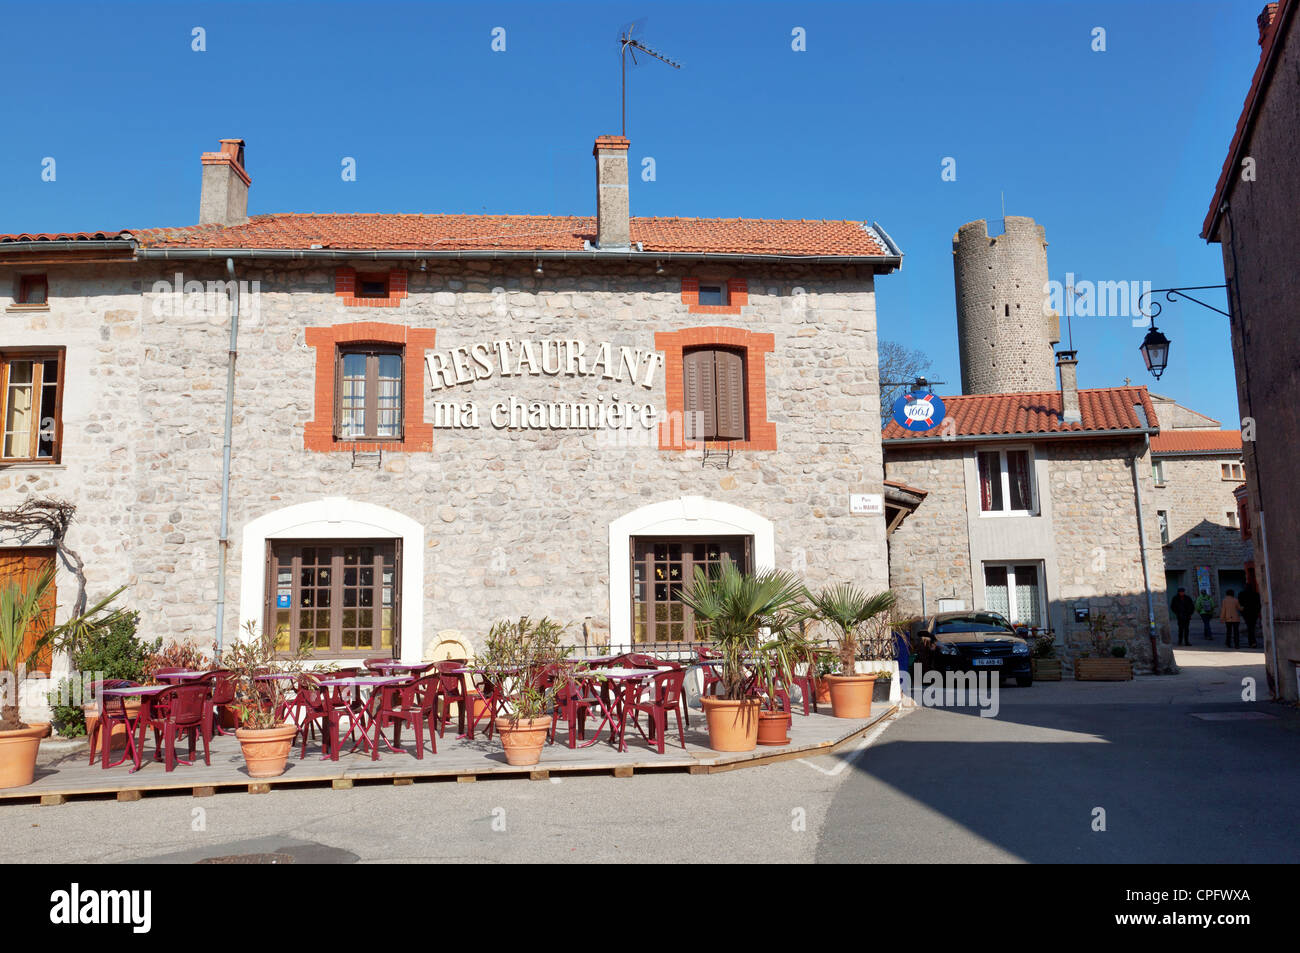 Restaurant ma chaumiere in medieval village of Chambles near Saint-Etienne, France Stock Photo